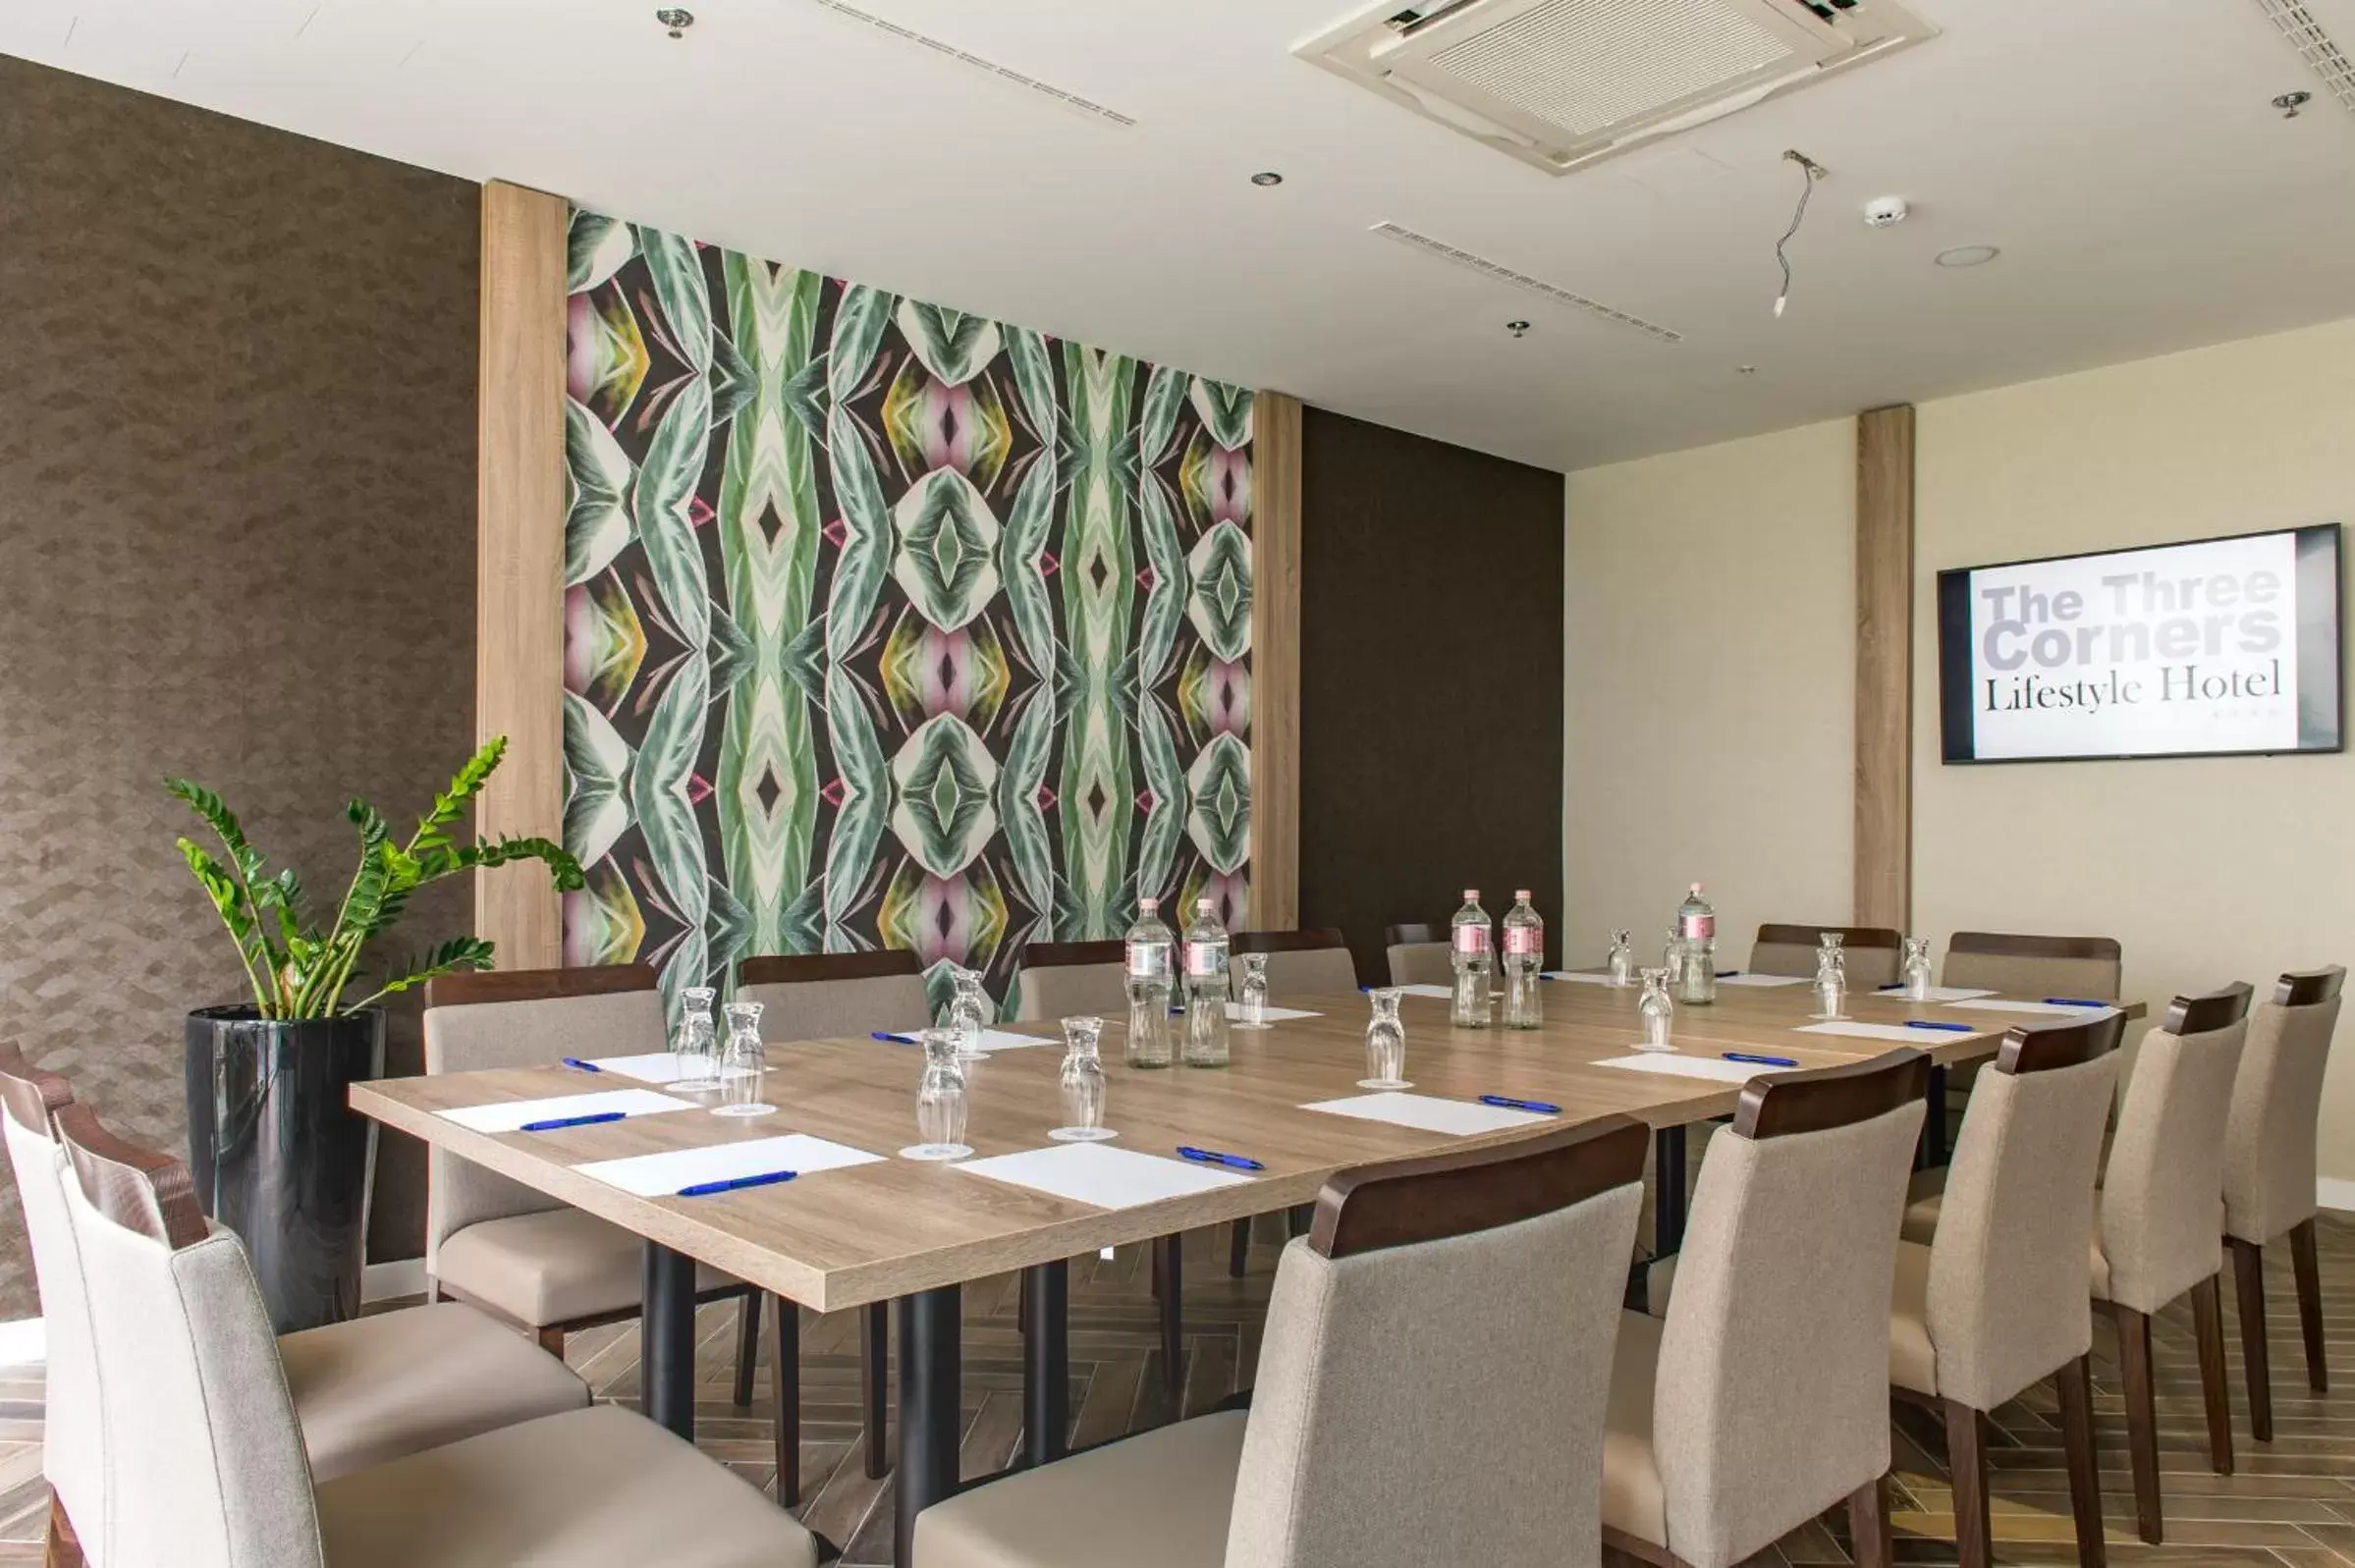 Meeting/conference room in The Three Corners Lifestyle Hotel